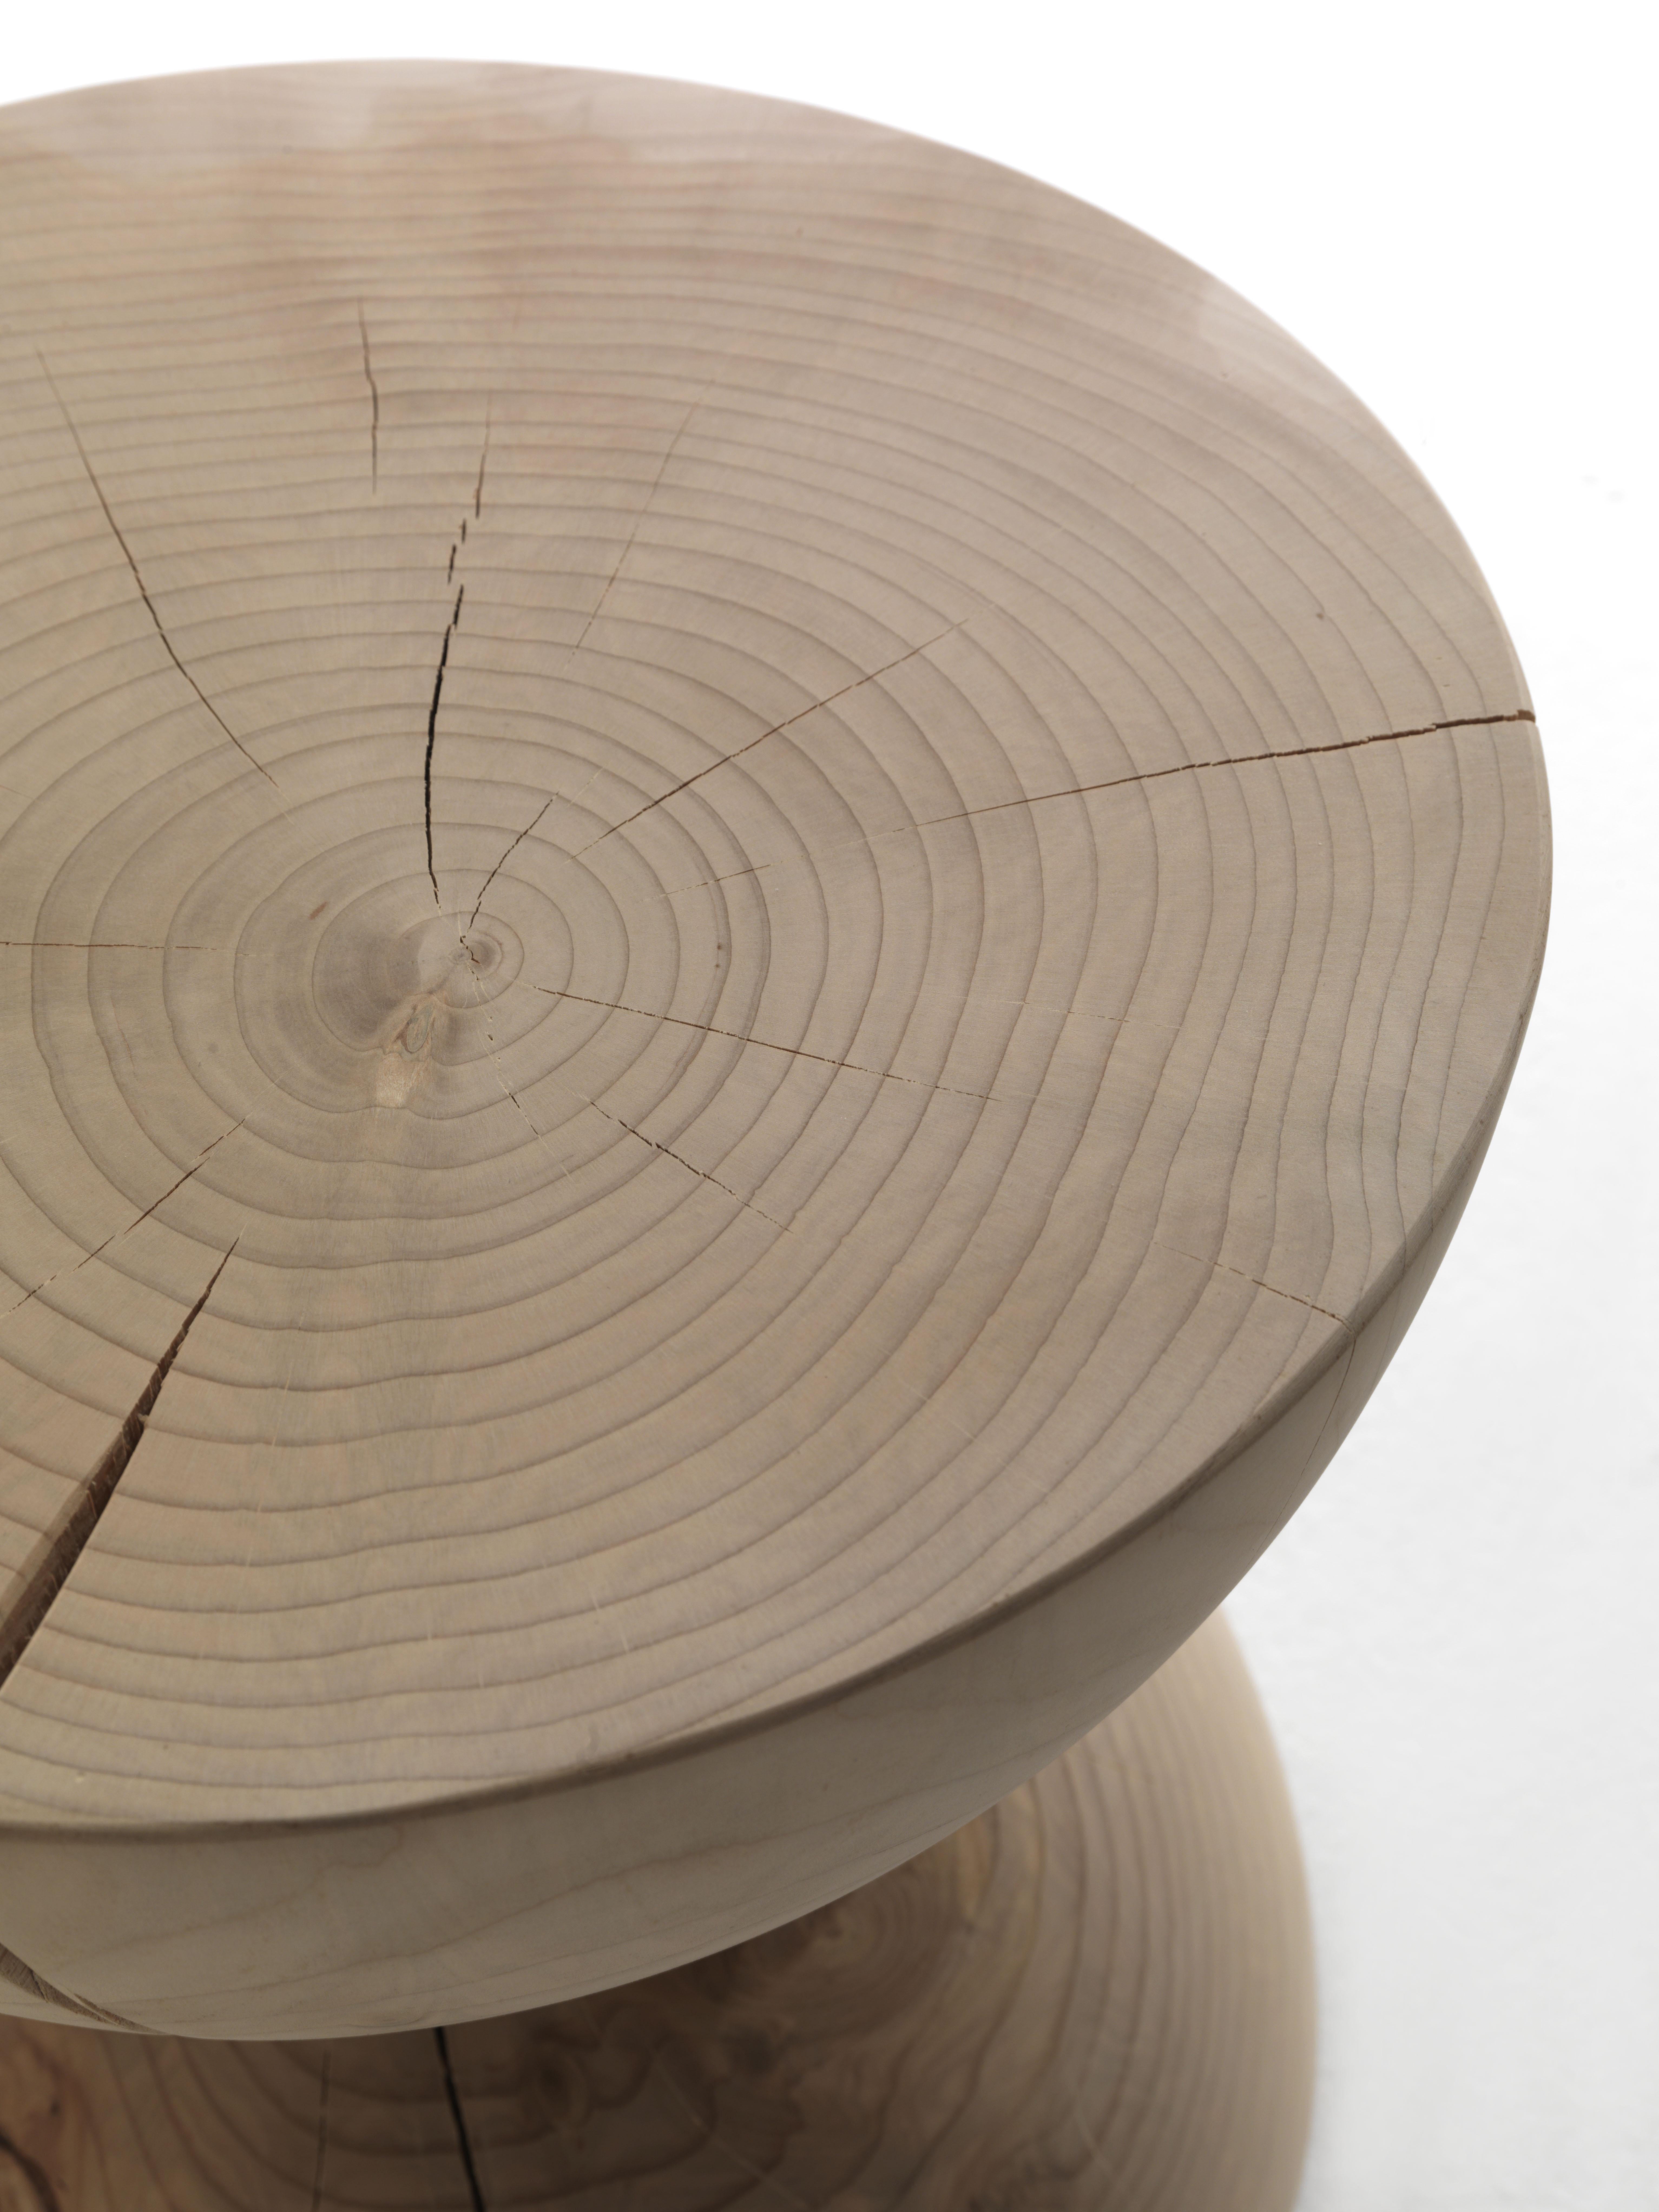 Stool made of a single block of scented cedar that features two semicircles positioned one on top of the other to form an hourglass. Designed by Mario Botta.